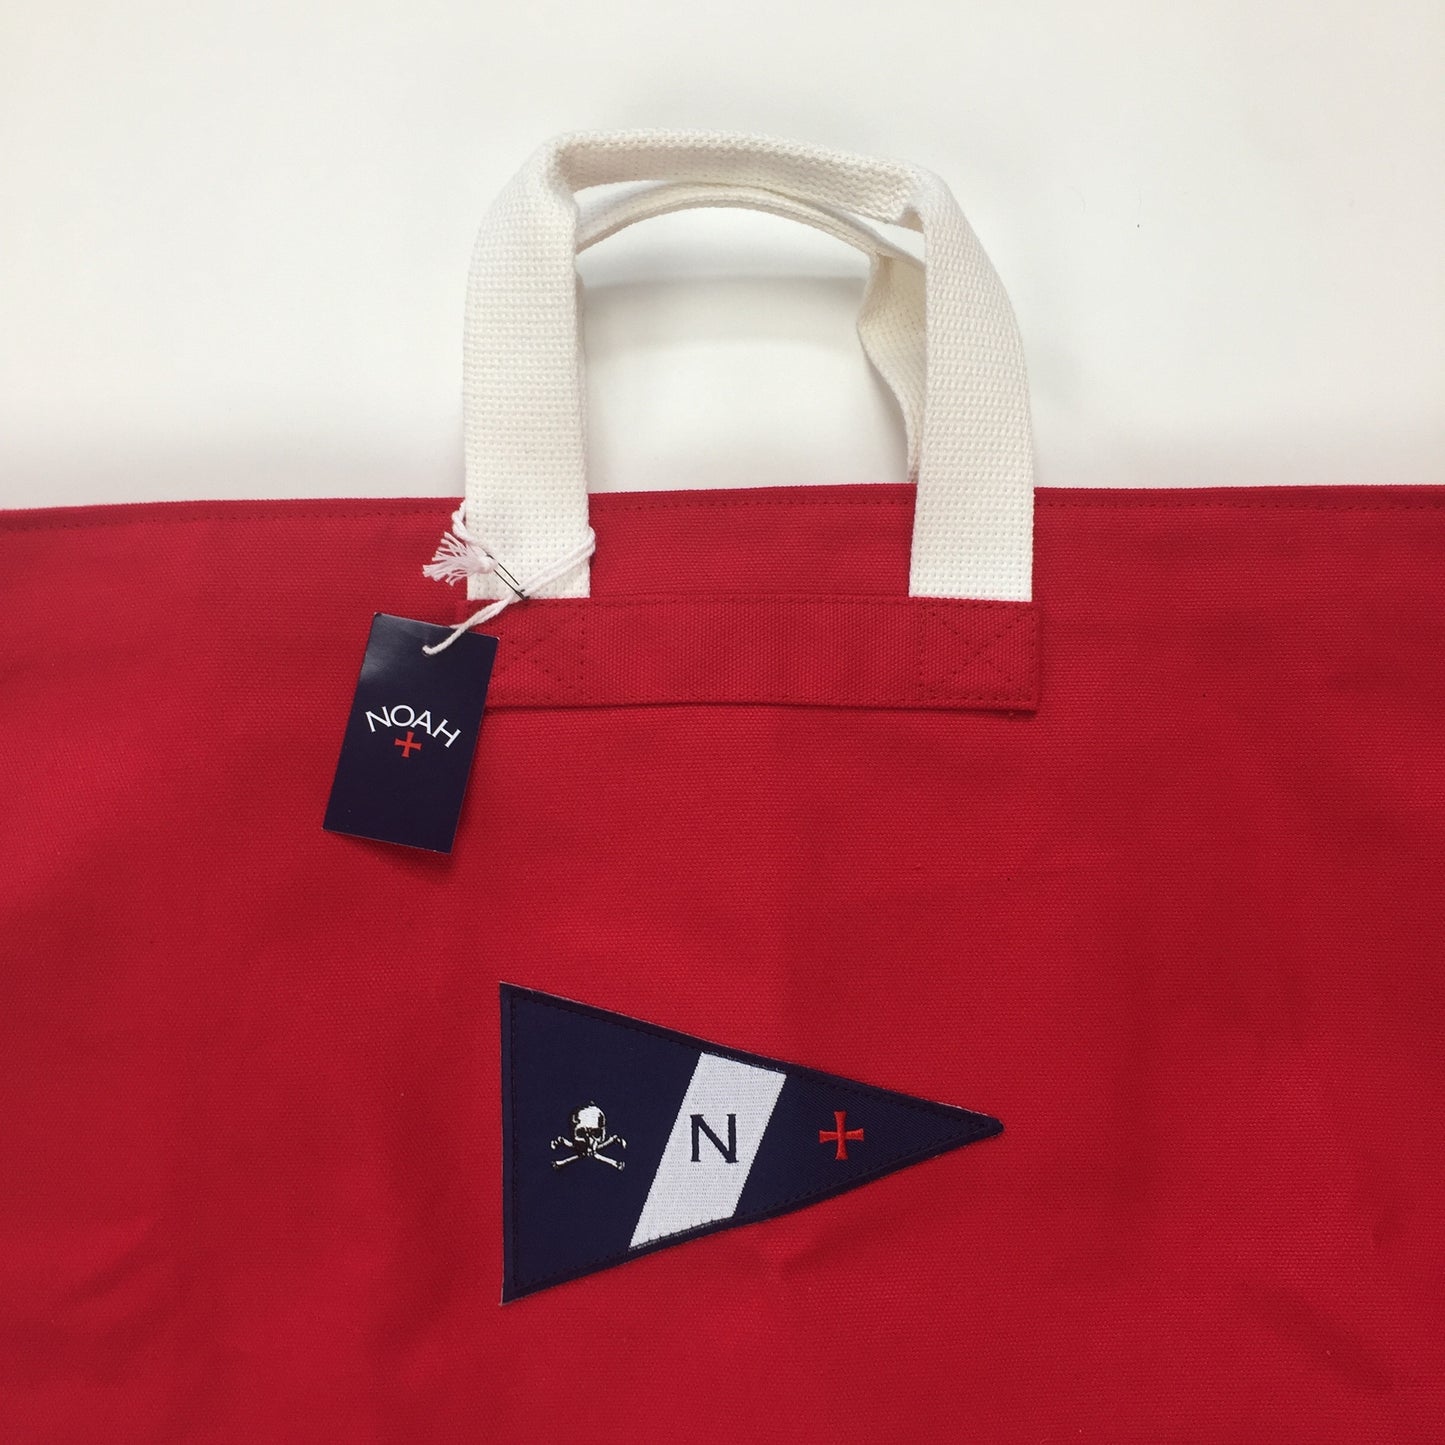 Noah - Red Canvas Holdall Bag